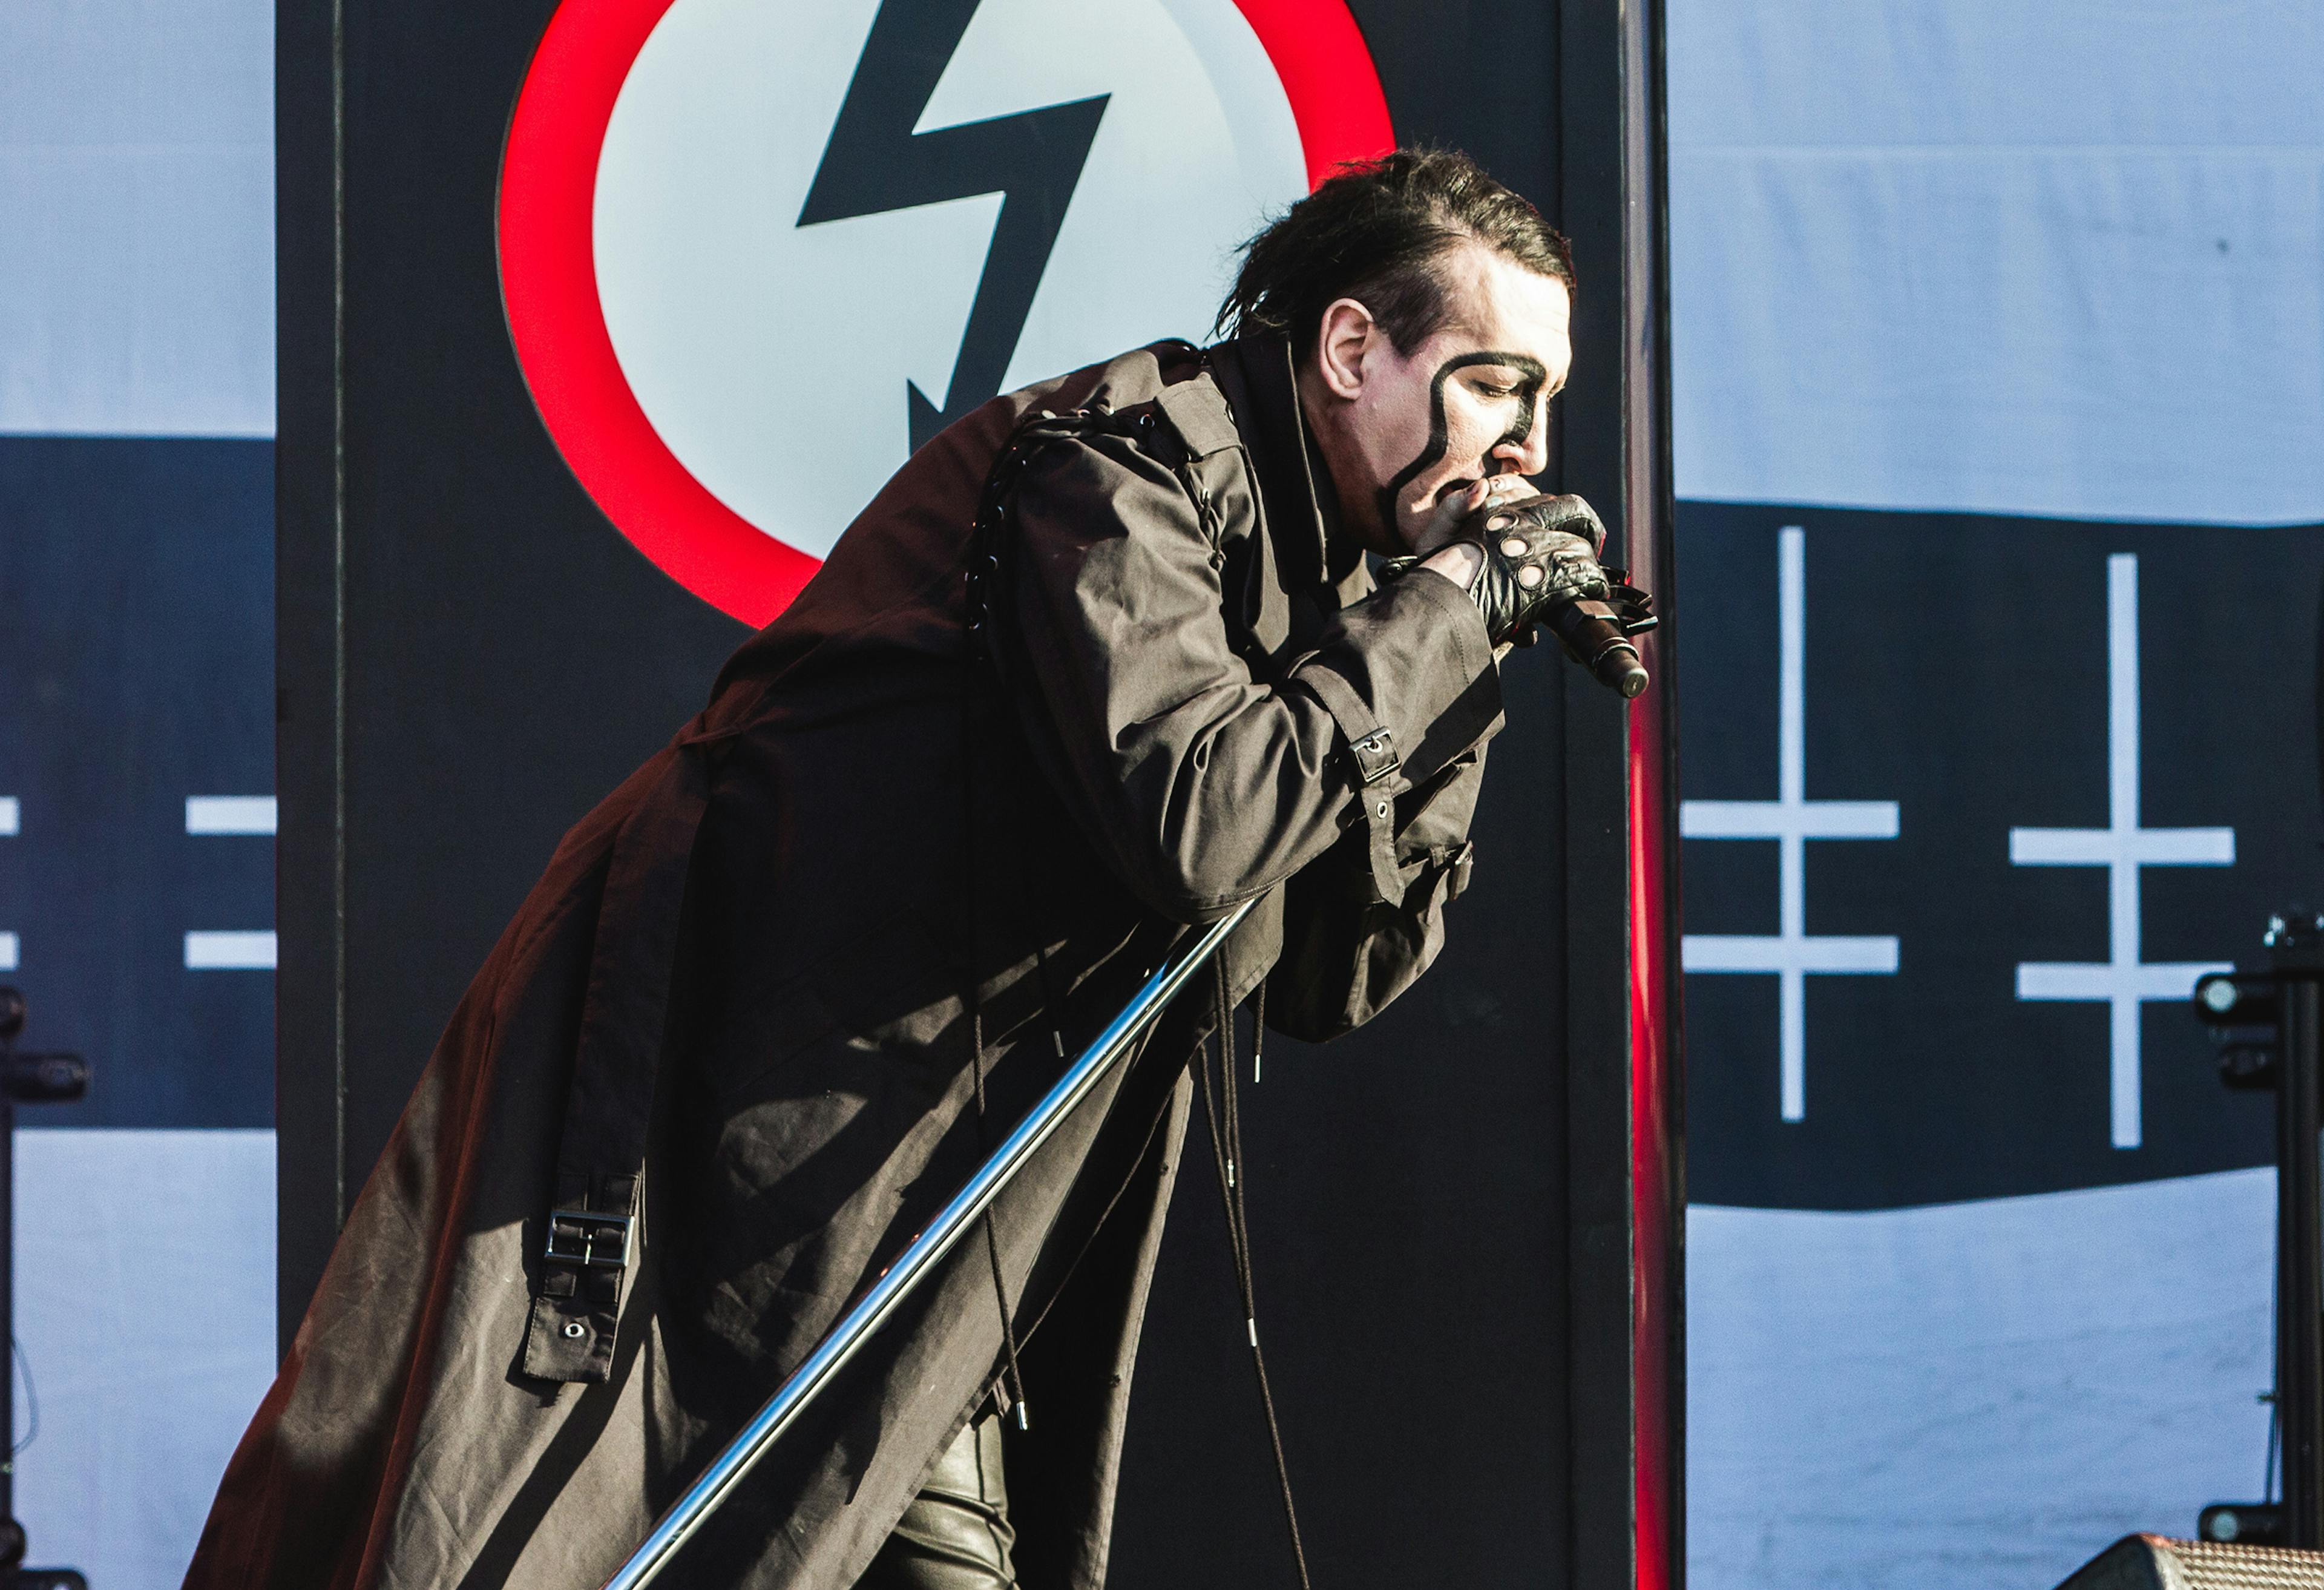 Listen To Marilyn Manson's New Cover Of The End